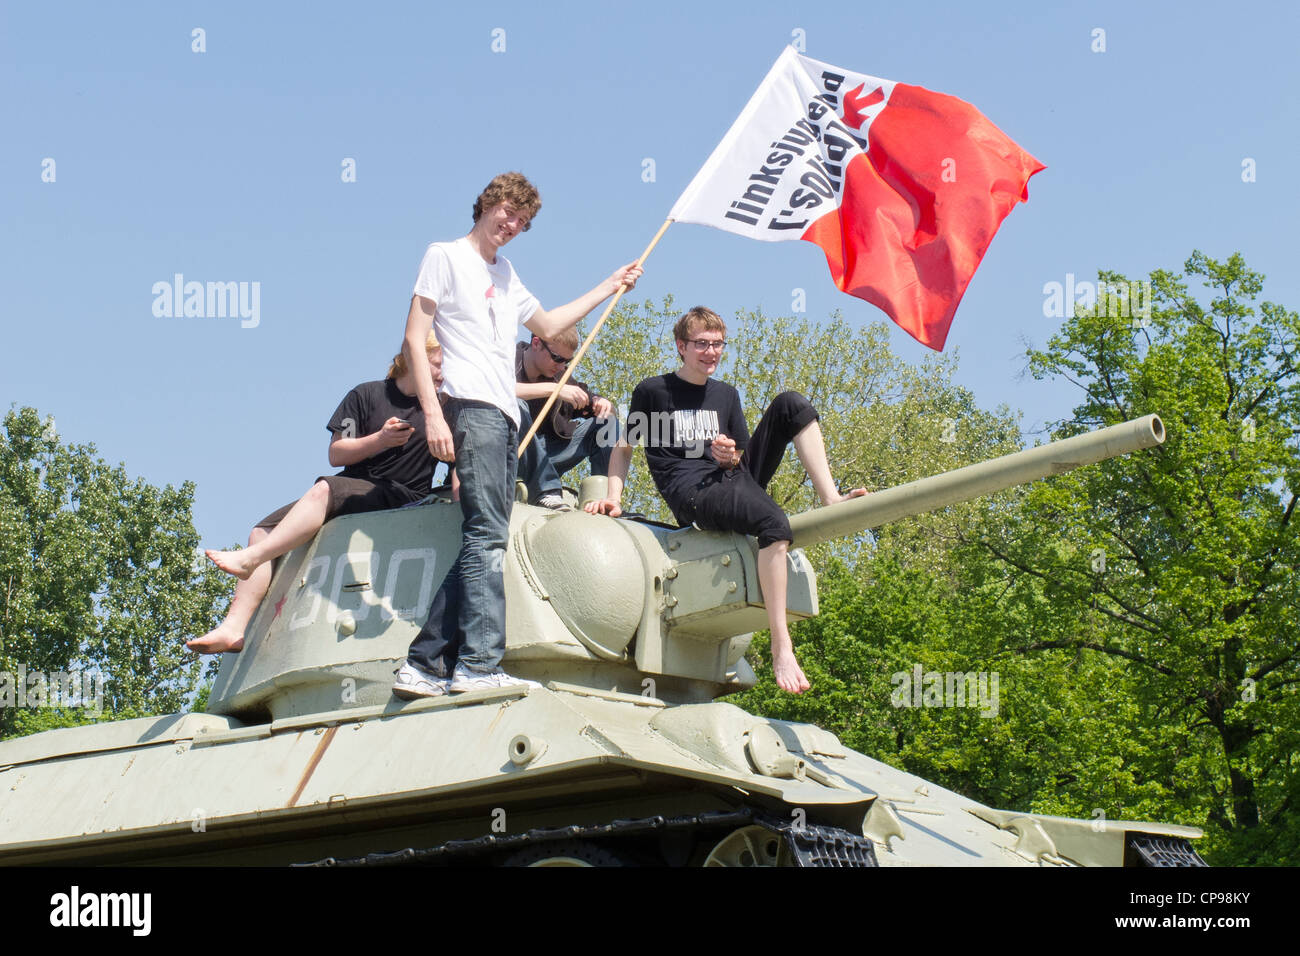 Berlin - The Russian War Memorial and tank. 17 Juni Strasse - May day celebrations with young men on the tank. Stock Photo